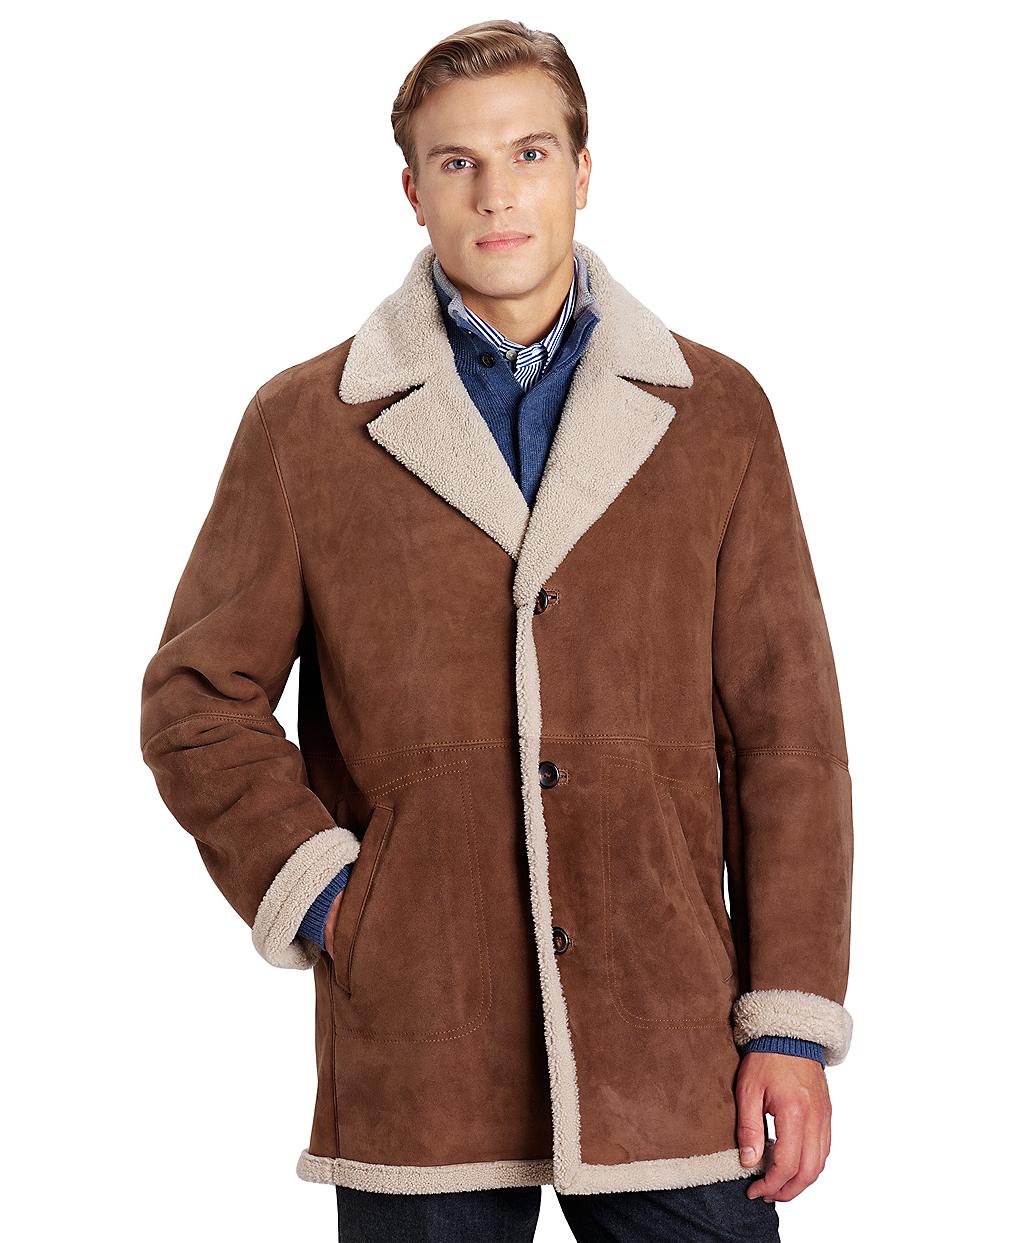 Lyst - Brooks brothers Shearling Coat in Brown for Men